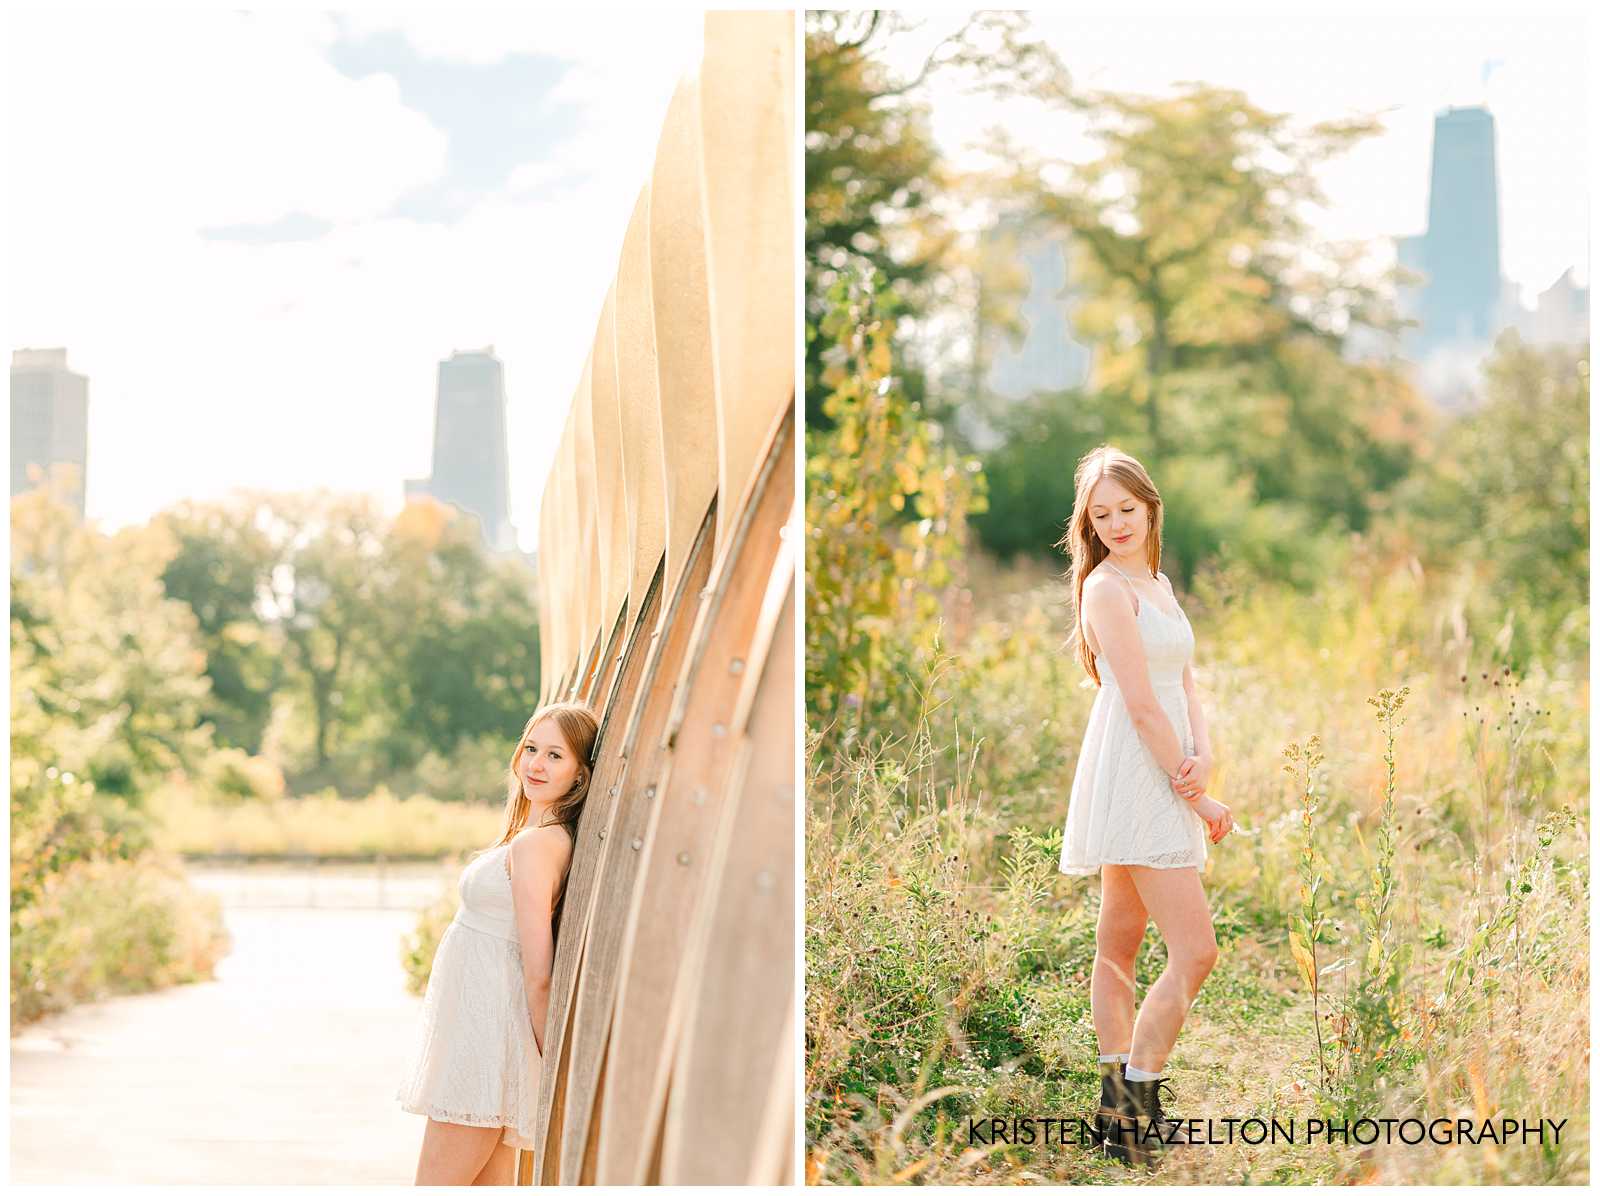 Girl in white dress leaning against the Honeycomb structure in Lincoln Park, in Chicago, IL